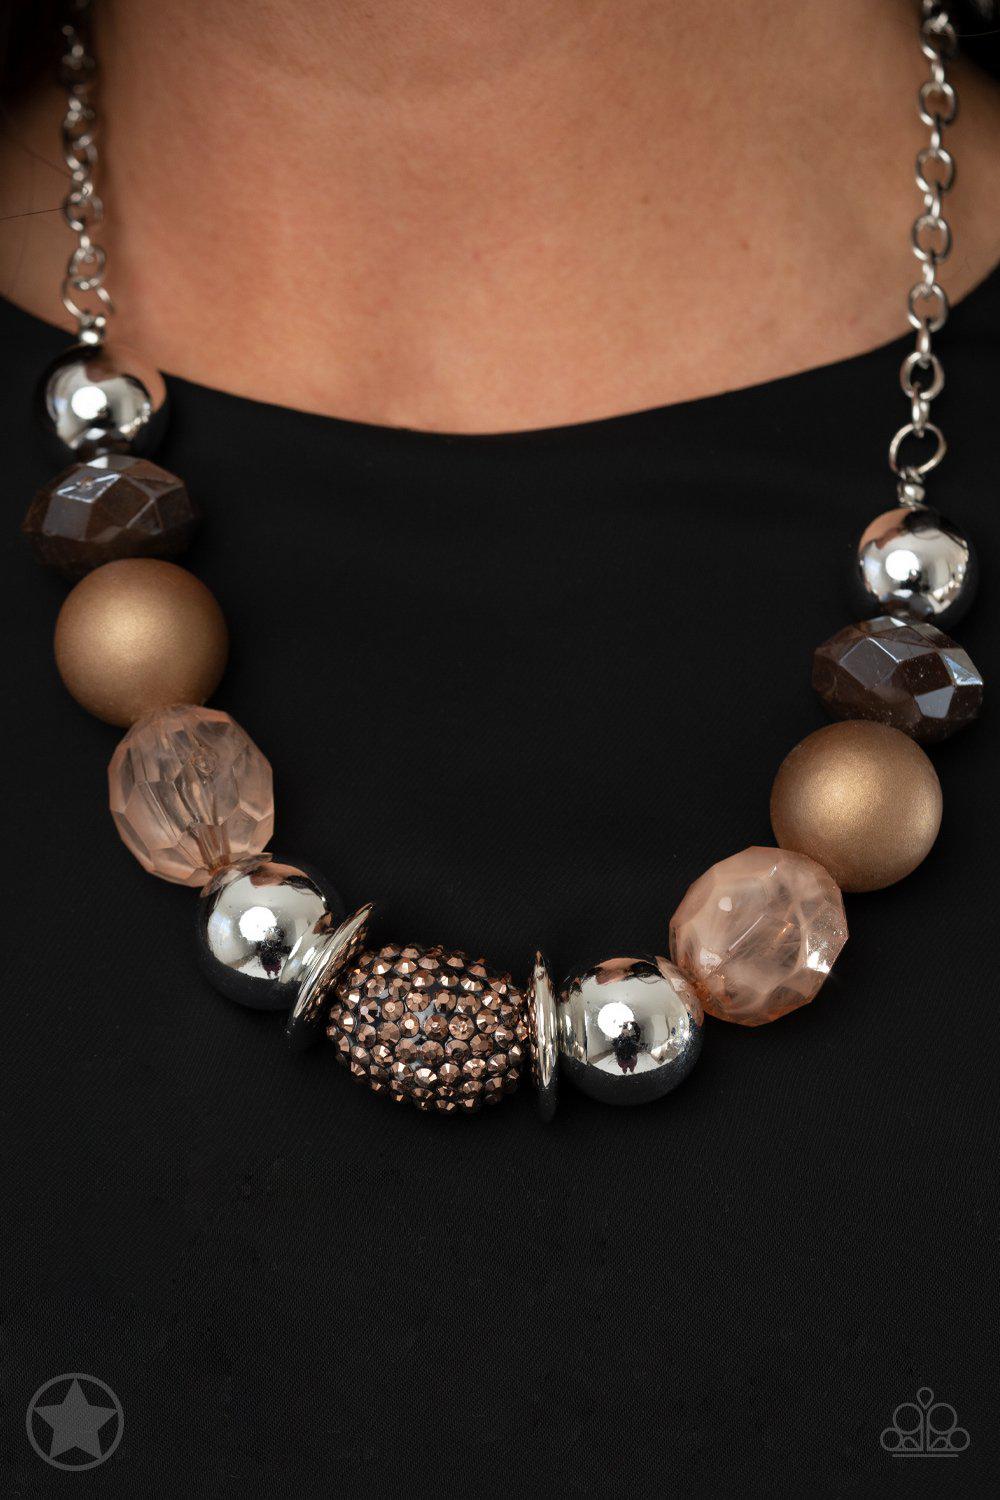 A Warm Welcome Copper Bead Necklace and matching Earrings - Paparazzi Accessories - model -CarasShop.com - $5 Jewelry by Cara Jewels